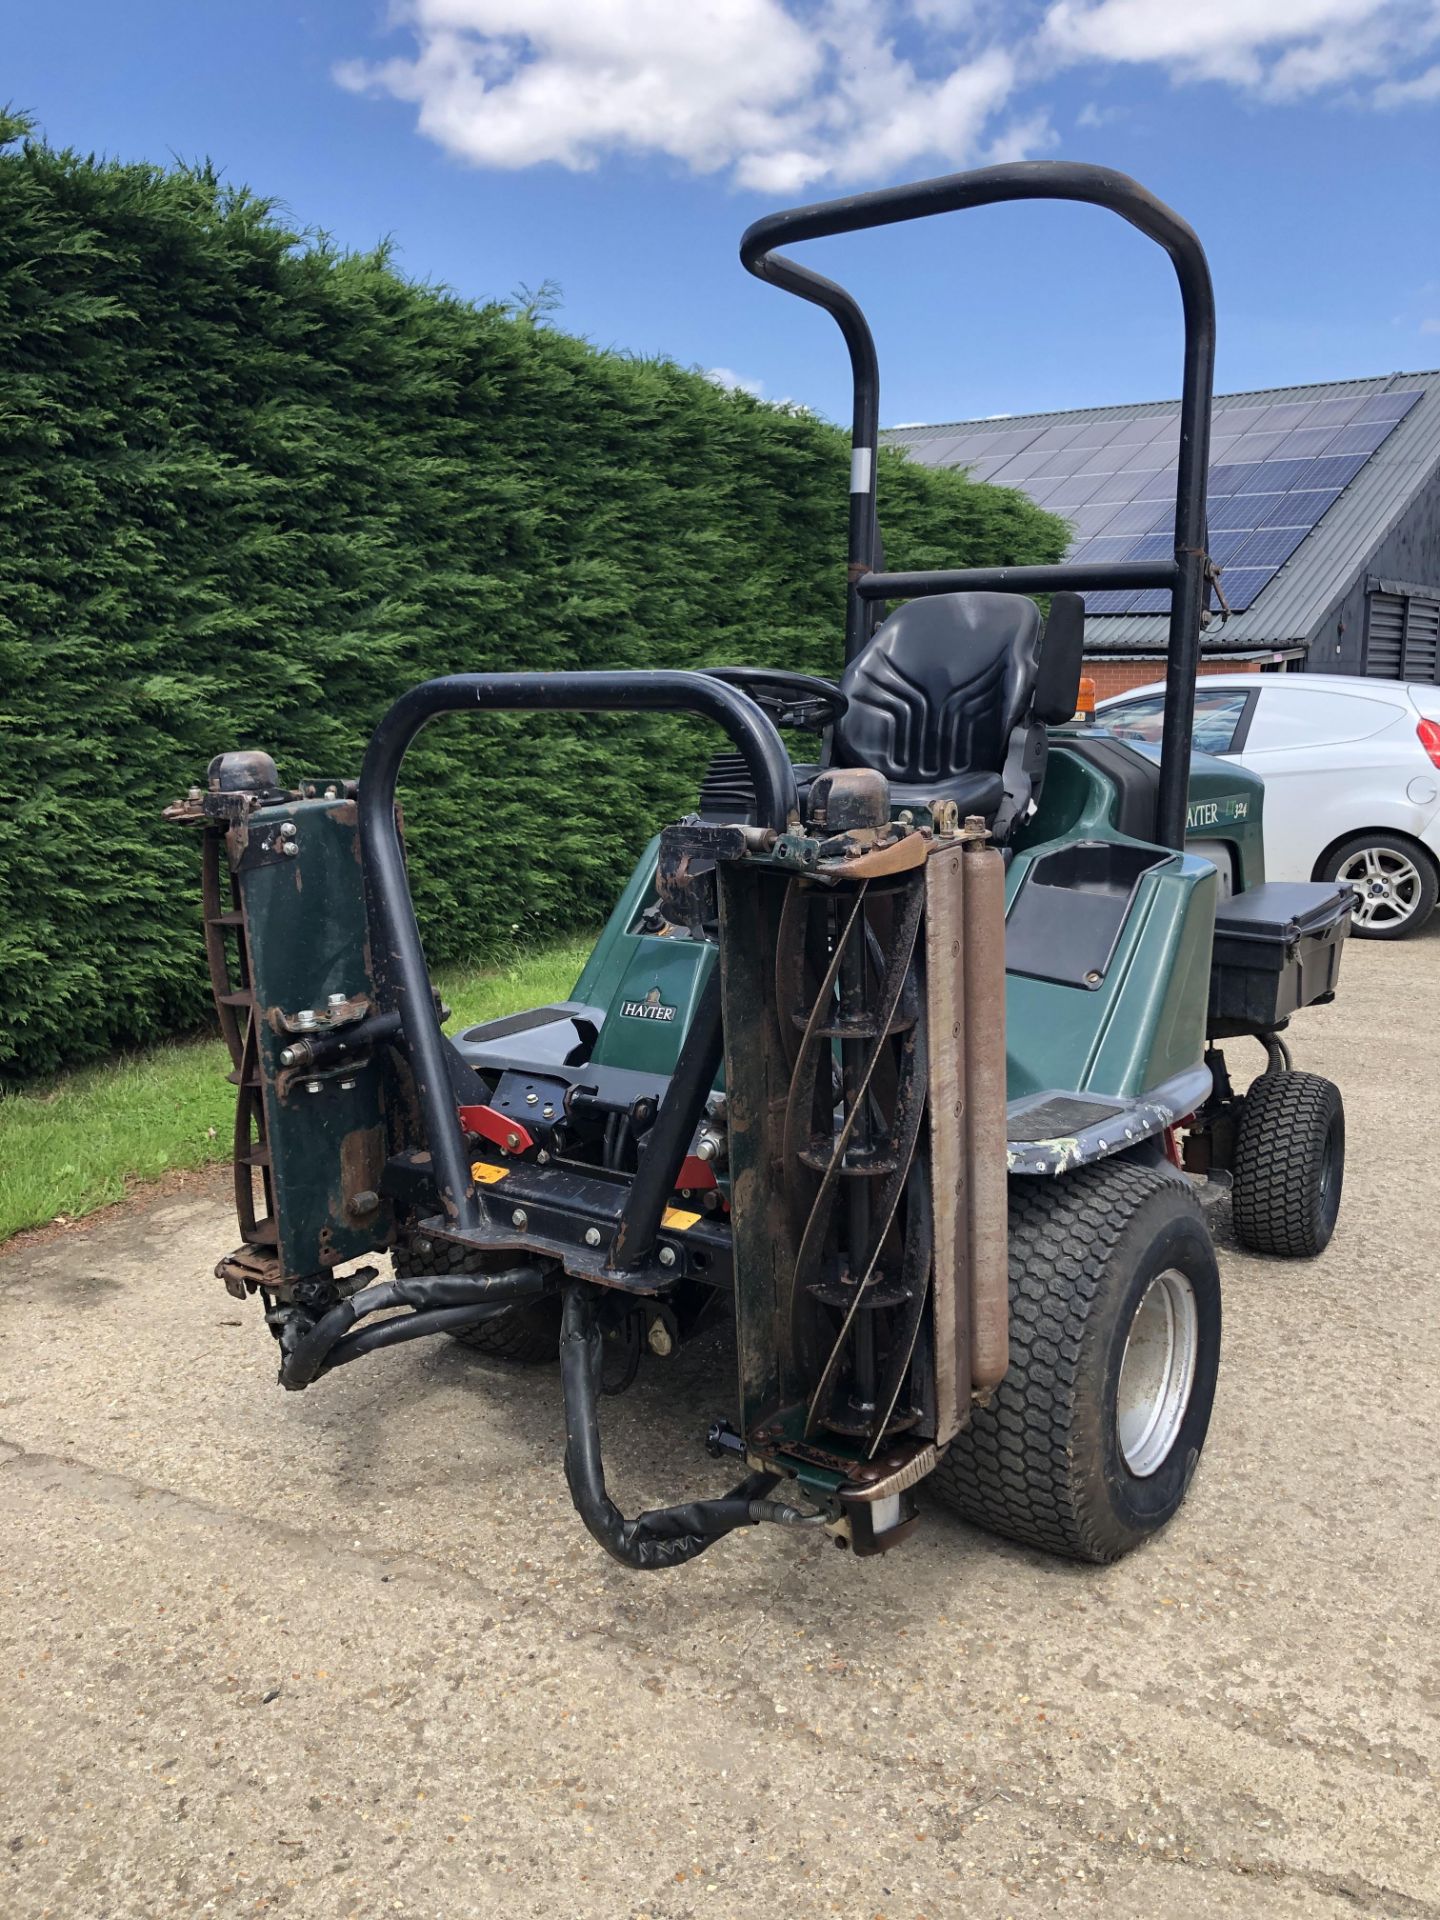 HAYTER LT324 RIDE ON LAWN MOWER, STARTS FIRST TIME, FULL WORKING ORDER, YEAR 2006 *PLUS VAT* - Image 2 of 8